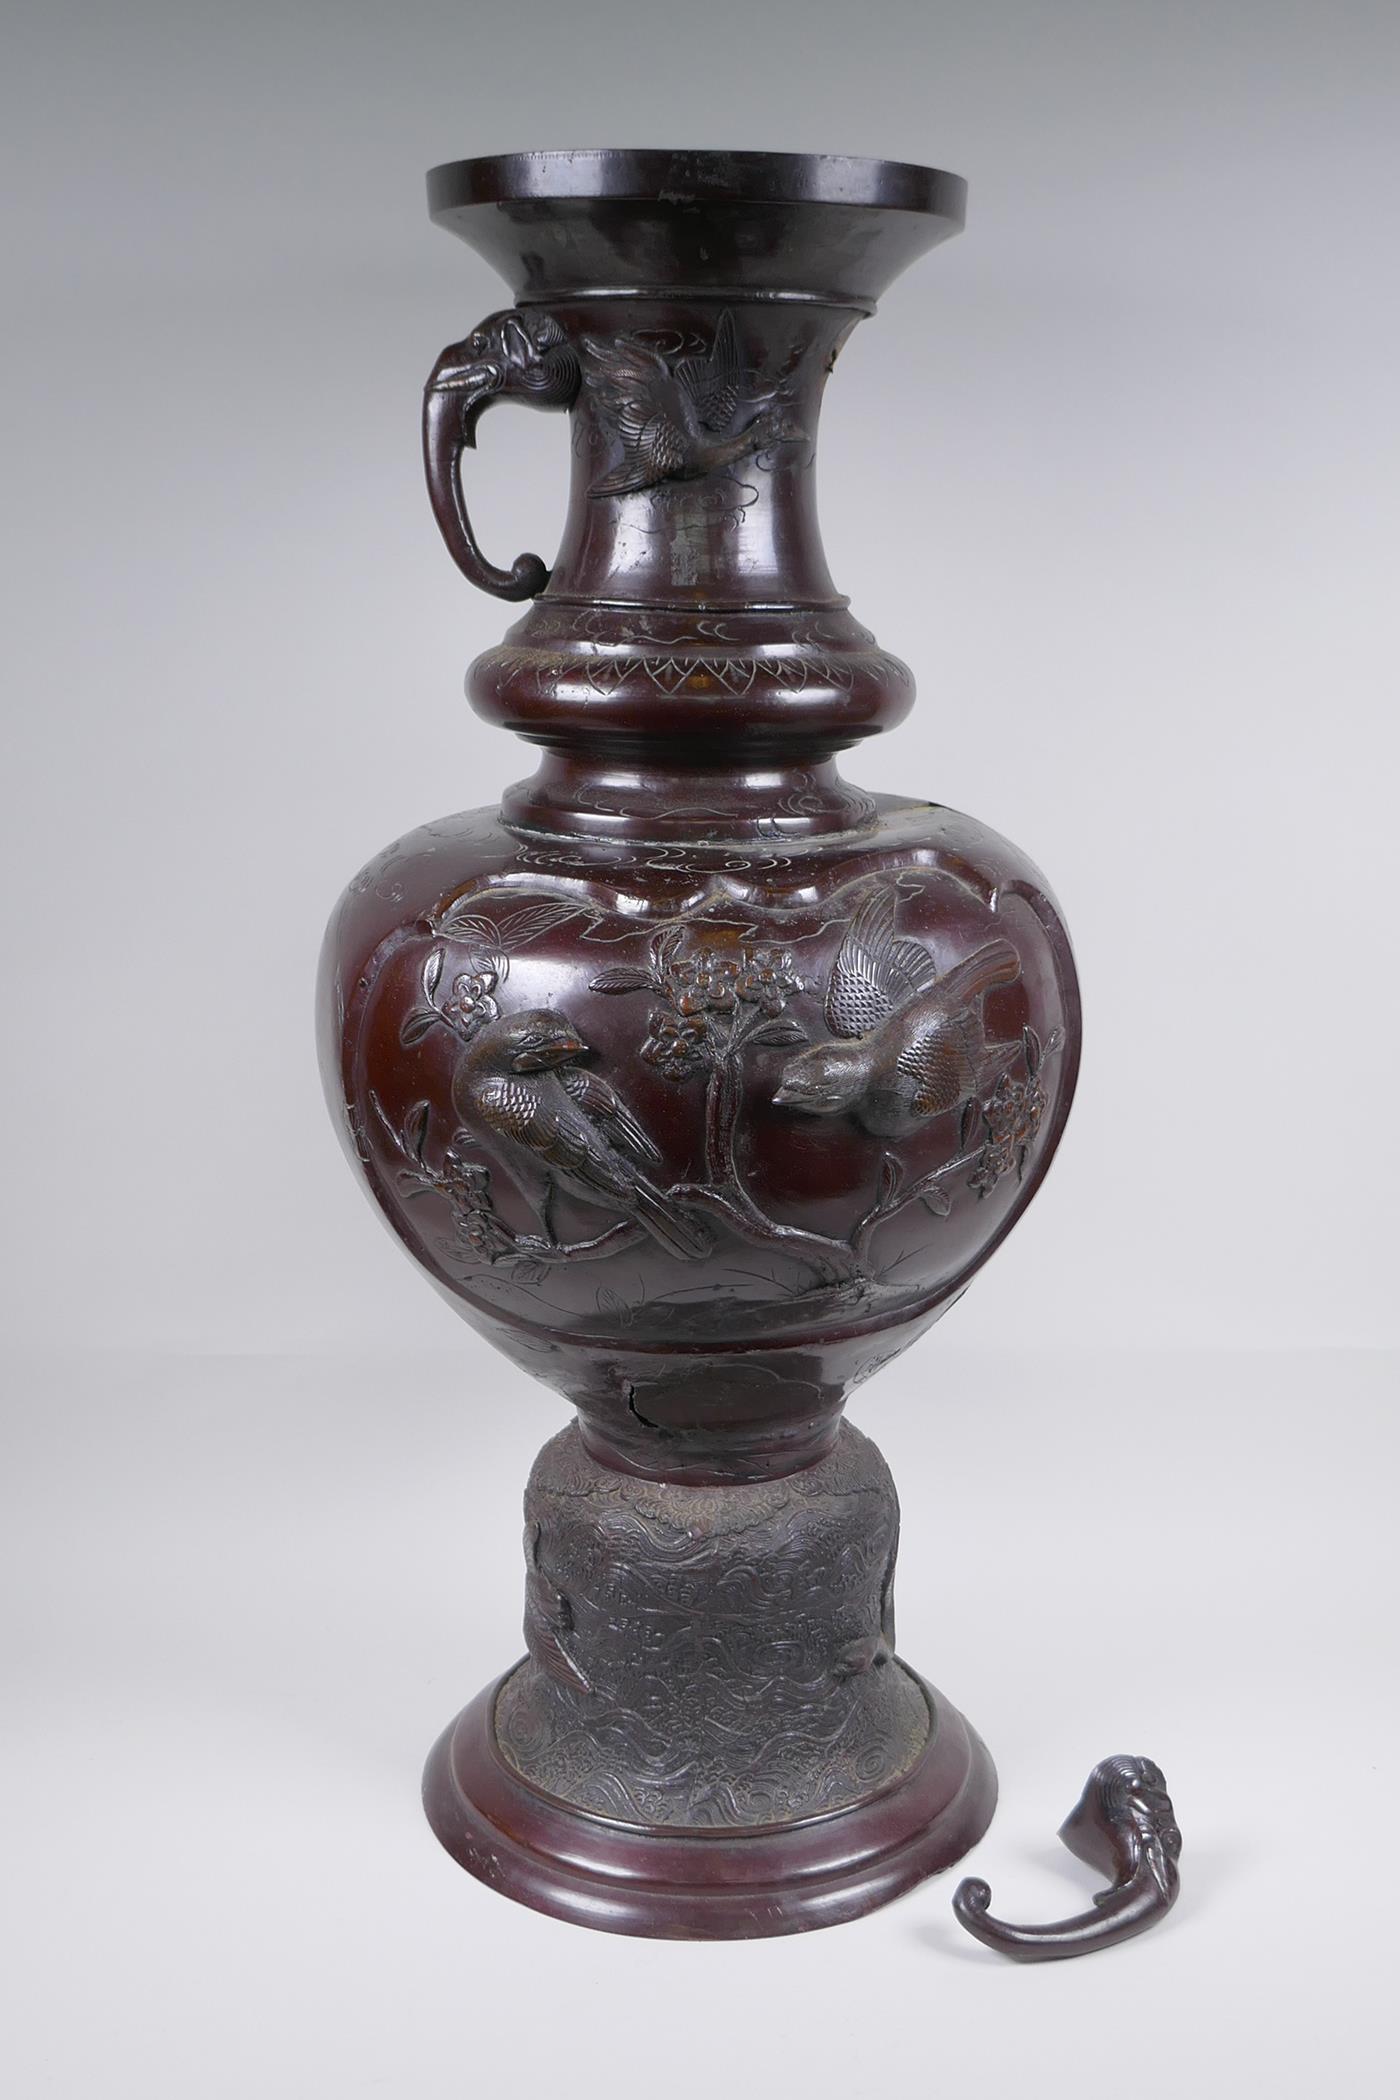 A Japanese Meiji period bronze urn with two handles and raised decorative panels depicting asiatic